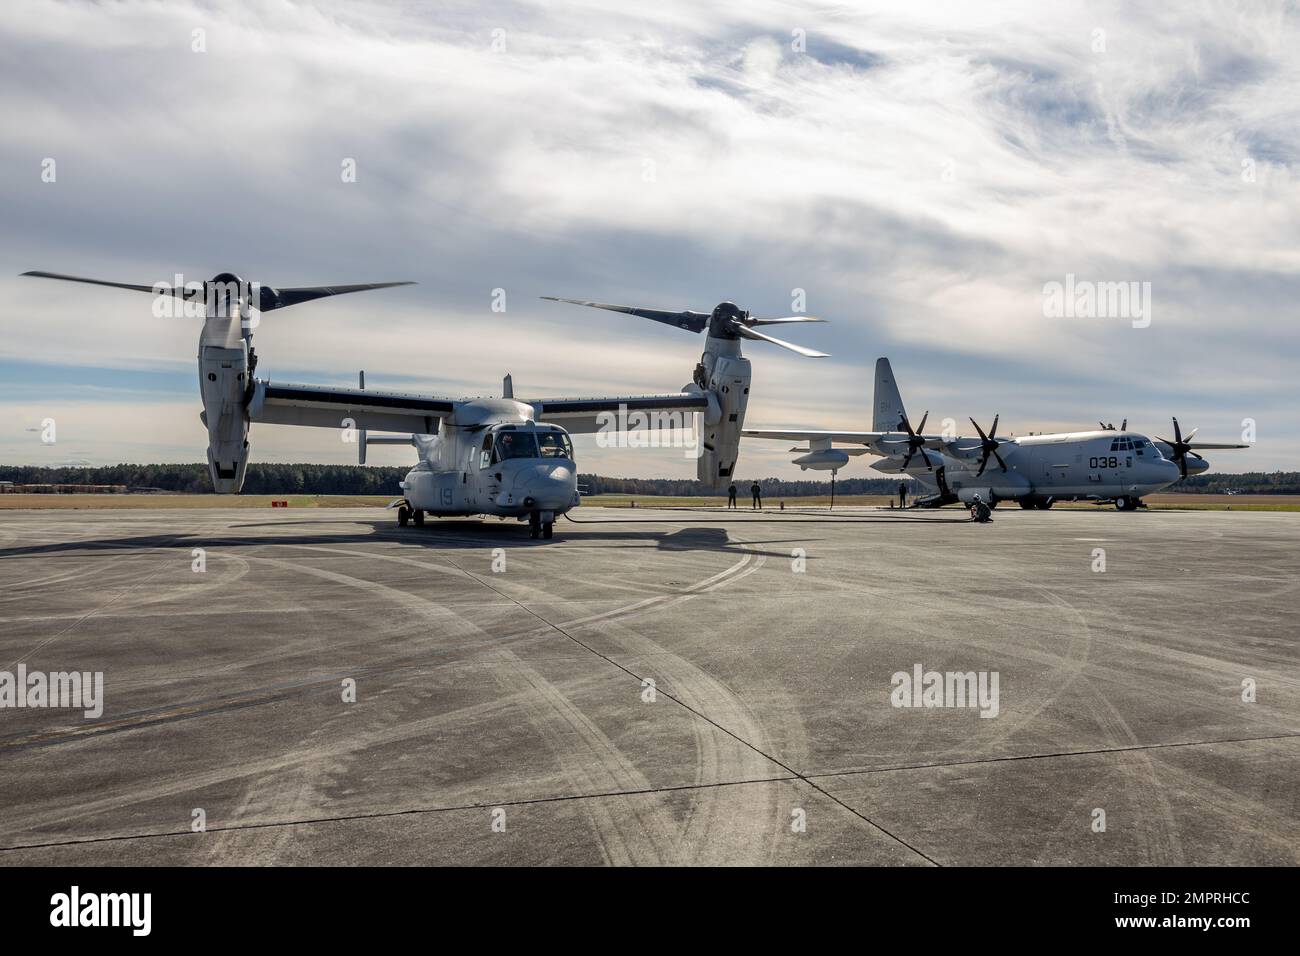 U.S. Marines with Marine Aerial Refueler Transport Squadron (VMGR) 252 refuel an MV-22B Osprey, assigned to Marine Medium Tiltrotor Squadron (VMM) 162, via air-delivered ground refueling at Blackstone Army Airfield, Virginia, Nov. 16, 2022. VMGR-252 provided assault support to Naval Special Warfare Group 2 during Exercise Trident 23-2 to enhance combat readiness and improve naval integration. VMGR-252 and VMM-162 are subordinate units of 2nd Marine Aircraft Wing, the aviation combat element of II Marine Expeditionary Force. Stock Photo